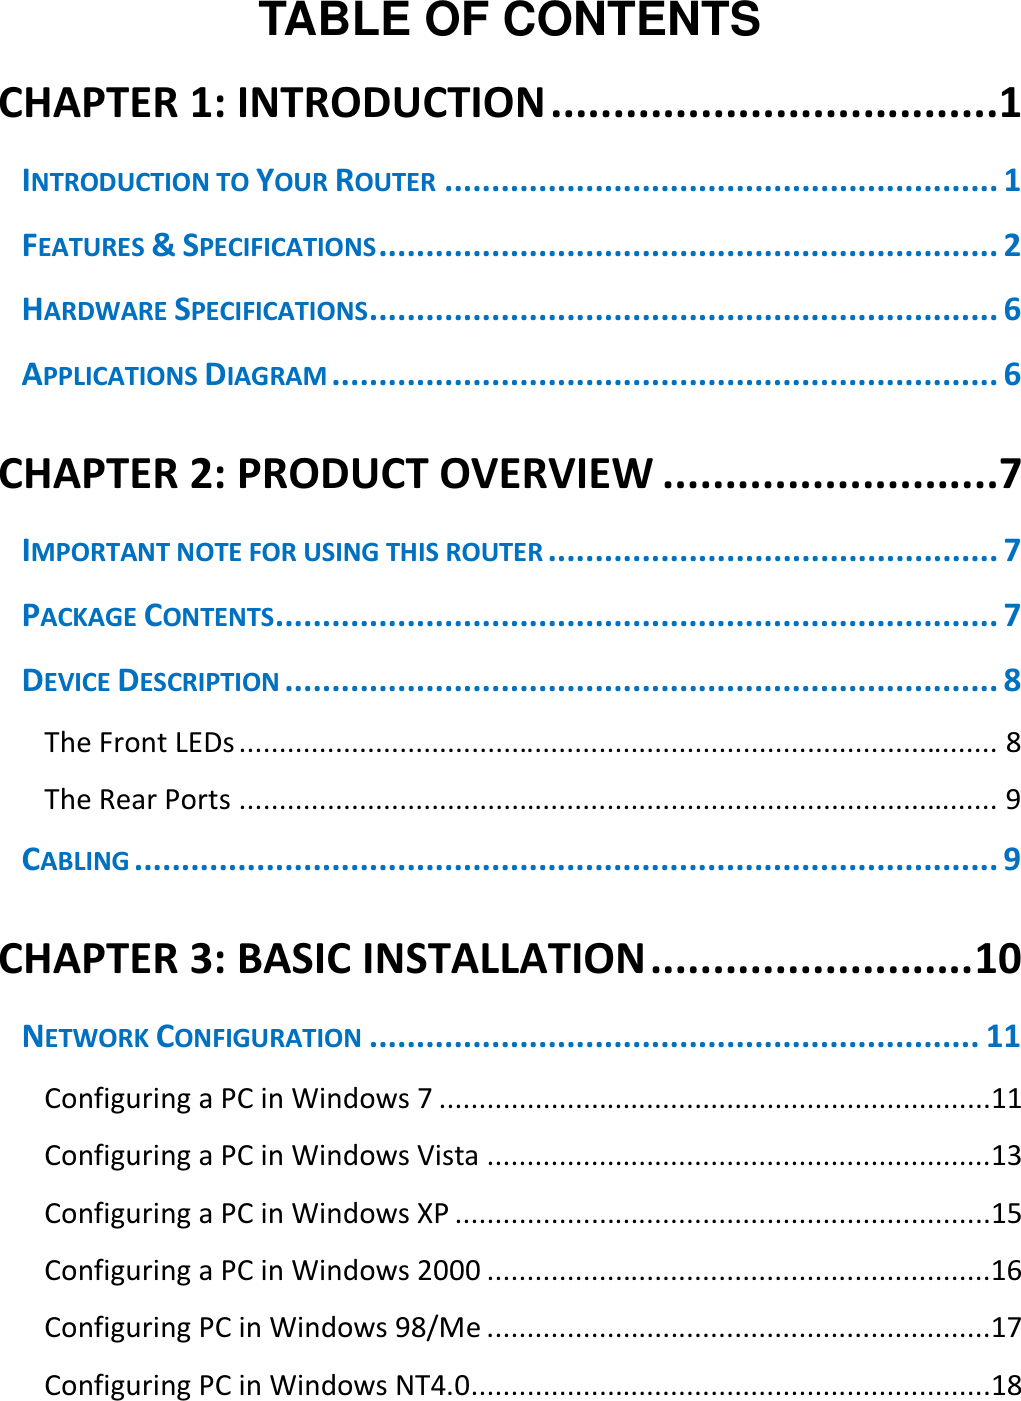    TABLE OF CONTENTS CHAPTER 1: INTRODUCTION ....................................1 INTRODUCTION TO YOUR ROUTER ........................................................... 1 FEATURES &amp; SPECIFICATIONS .................................................................. 2 HARDWARE SPECIFICATIONS ................................................................... 6 APPLICATIONS DIAGRAM ....................................................................... 6 CHAPTER 2: PRODUCT OVERVIEW ...........................7 IMPORTANT NOTE FOR USING THIS ROUTER ................................................ 7 PACKAGE CONTENTS ............................................................................. 7 DEVICE DESCRIPTION ............................................................................ 8 The Front LEDs ............................................................................................... 8 The Rear Ports ............................................................................................... 9 CABLING ............................................................................................ 9 CHAPTER 3: BASIC INSTALLATION .......................... 10 NETWORK CONFIGURATION ................................................................. 11 Configuring a PC in Windows 7 .....................................................................11 Configuring a PC in Windows Vista ...............................................................13 Configuring a PC in Windows XP ...................................................................15 Configuring a PC in Windows 2000 ...............................................................16 Configuring PC in Windows 98/Me ...............................................................17 Configuring PC in Windows NT4.0 .................................................................18 